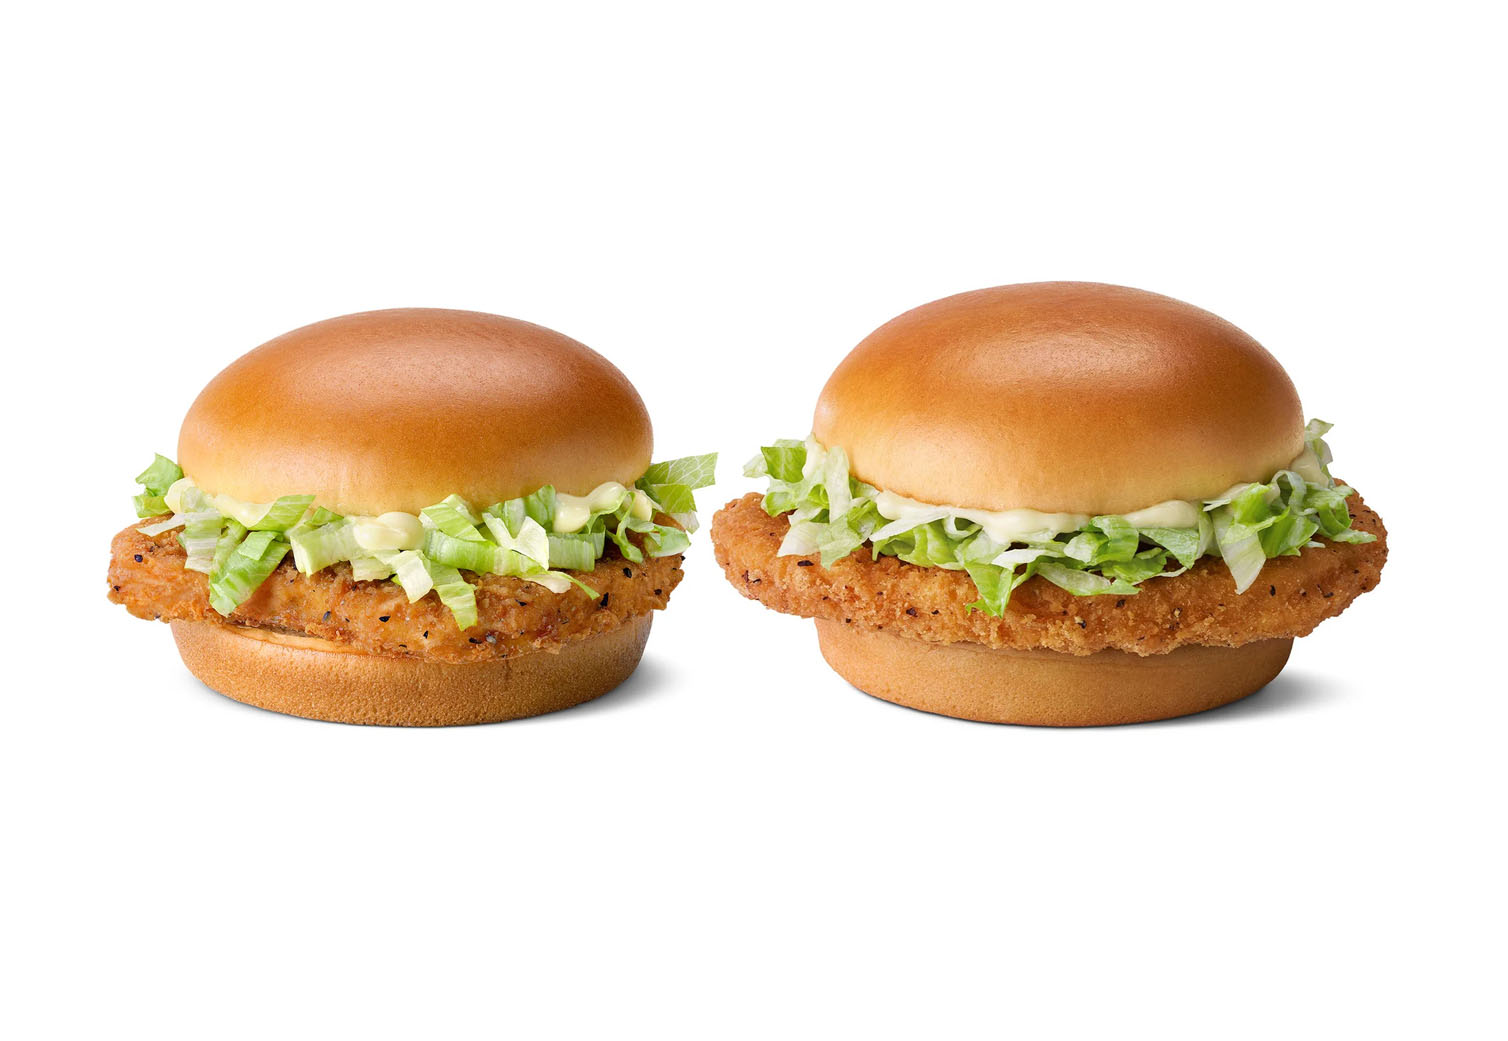 10-mcchicken-nutritional-facts